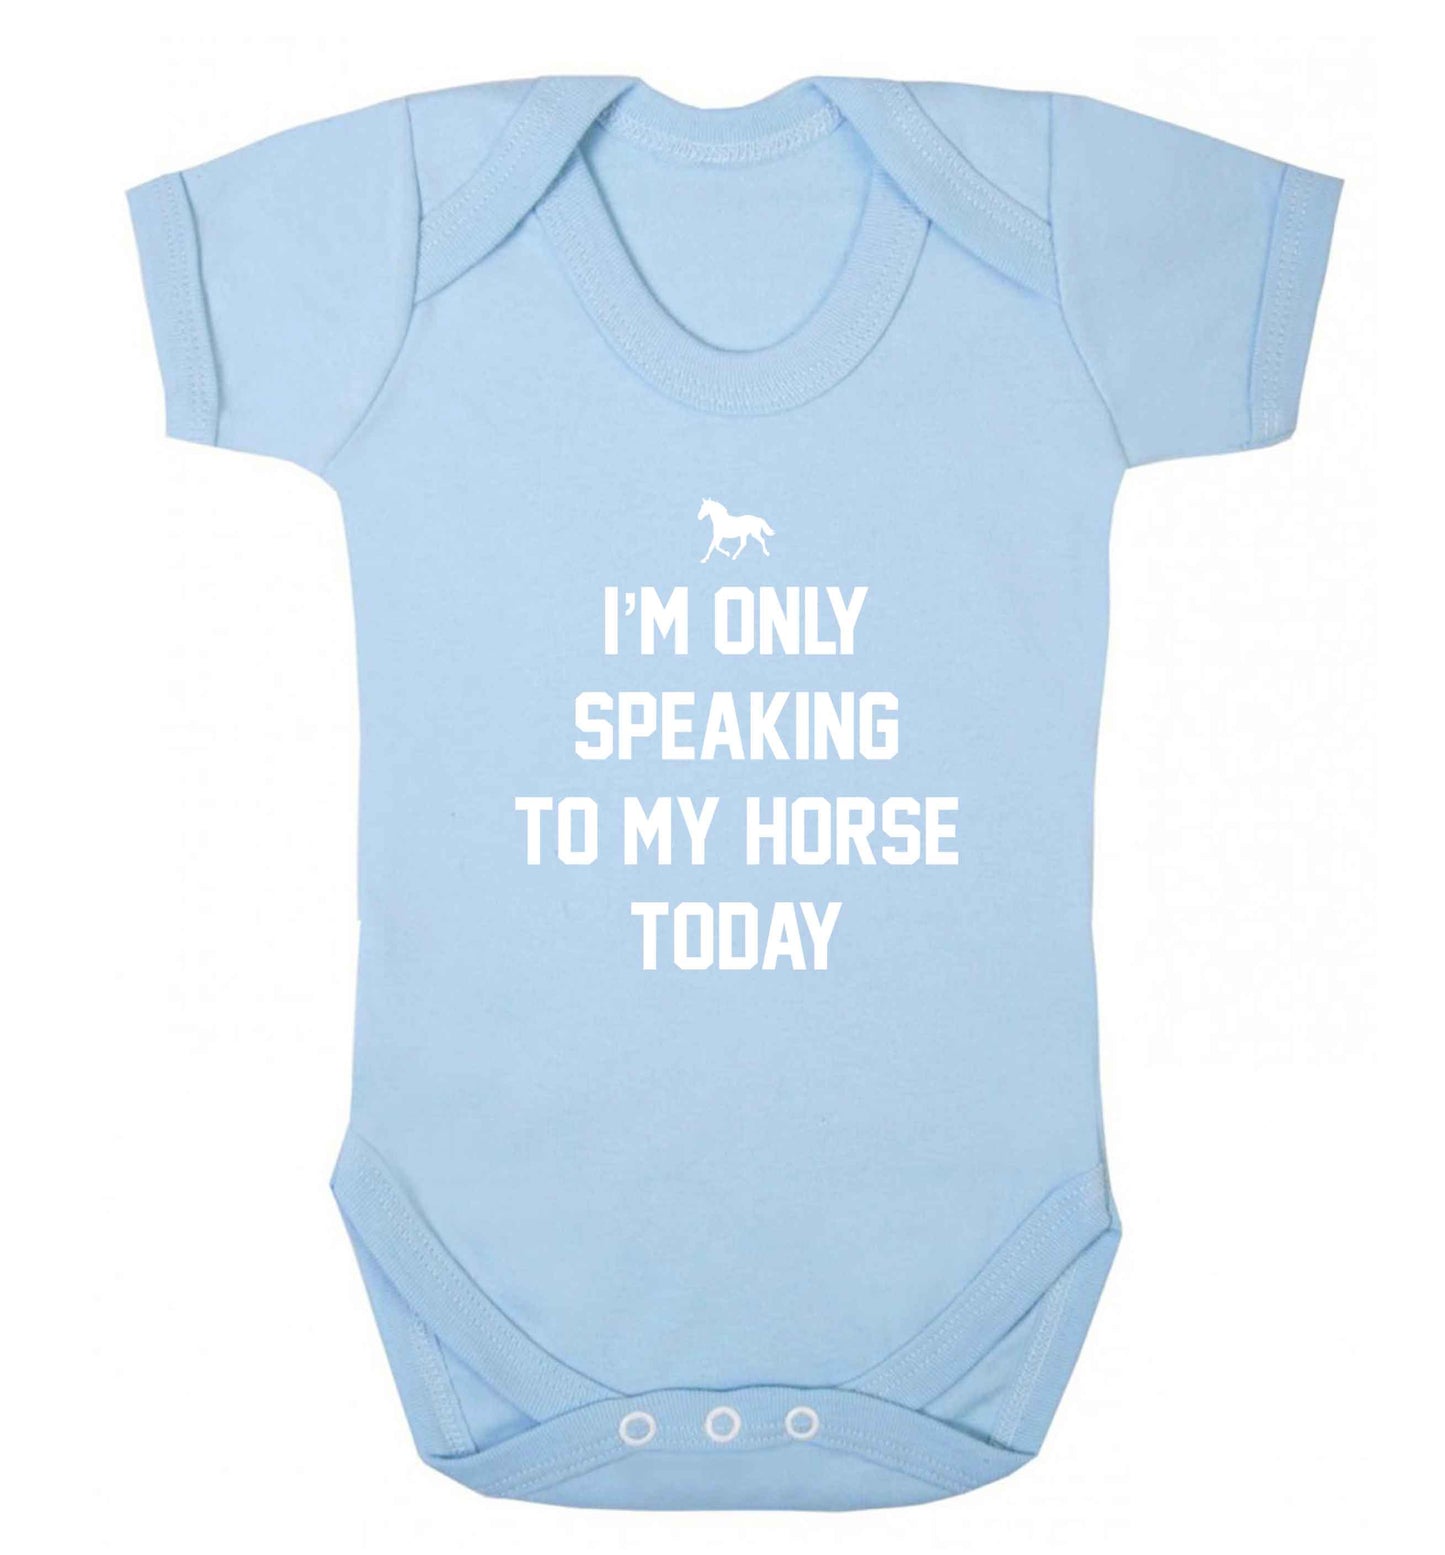 I'm only speaking to my horse today baby vest pale blue 18-24 months